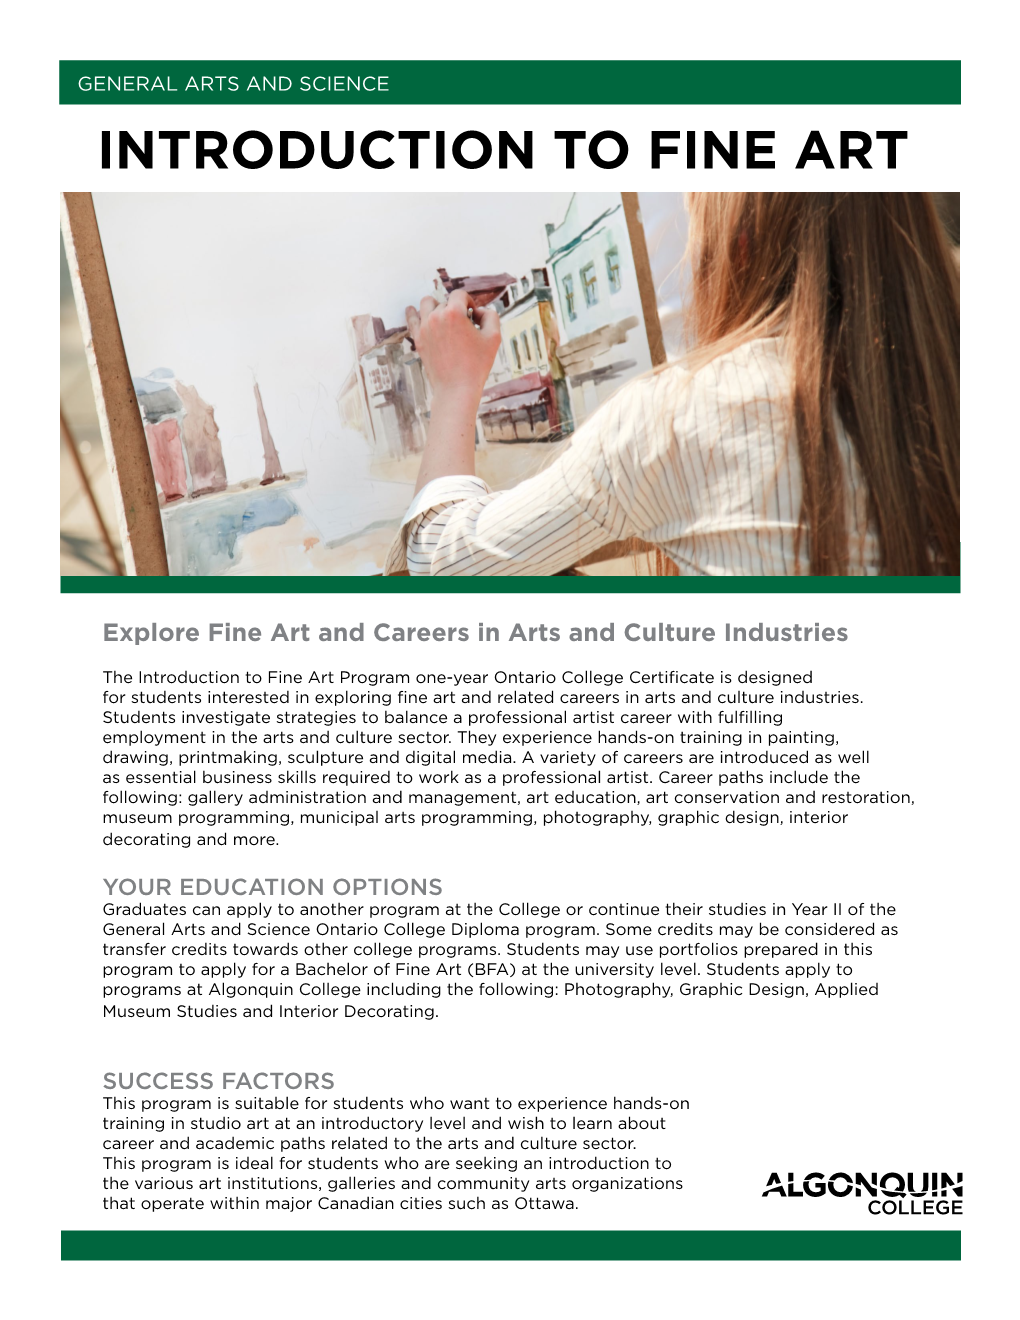 Introduction to Fine Art